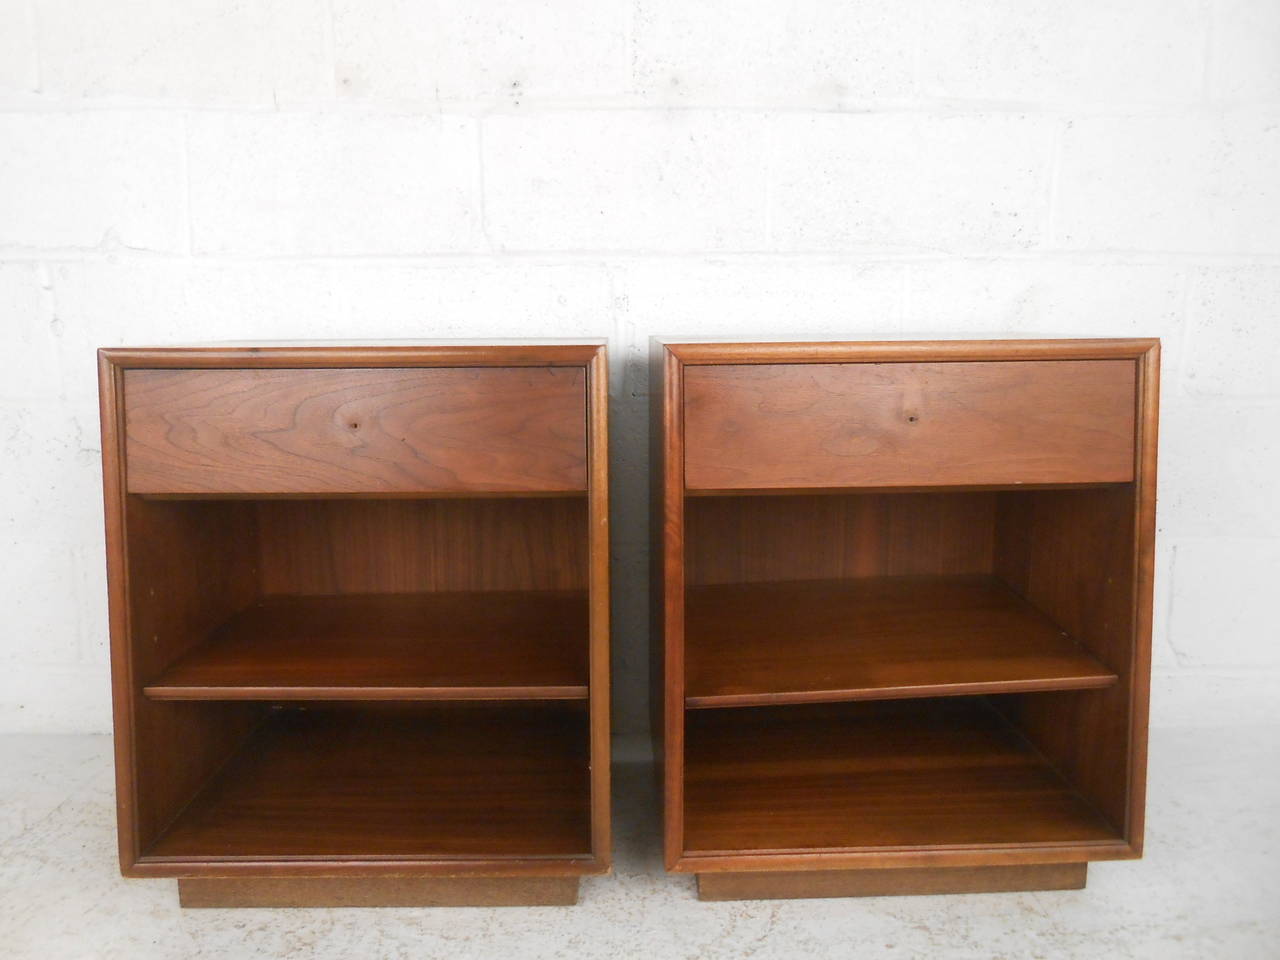 This pair of Mid-Century nightstands by Drexel features solid walnut construction and a single drawer for storage.

Please confirm item location (NY or NJ) with dealer.